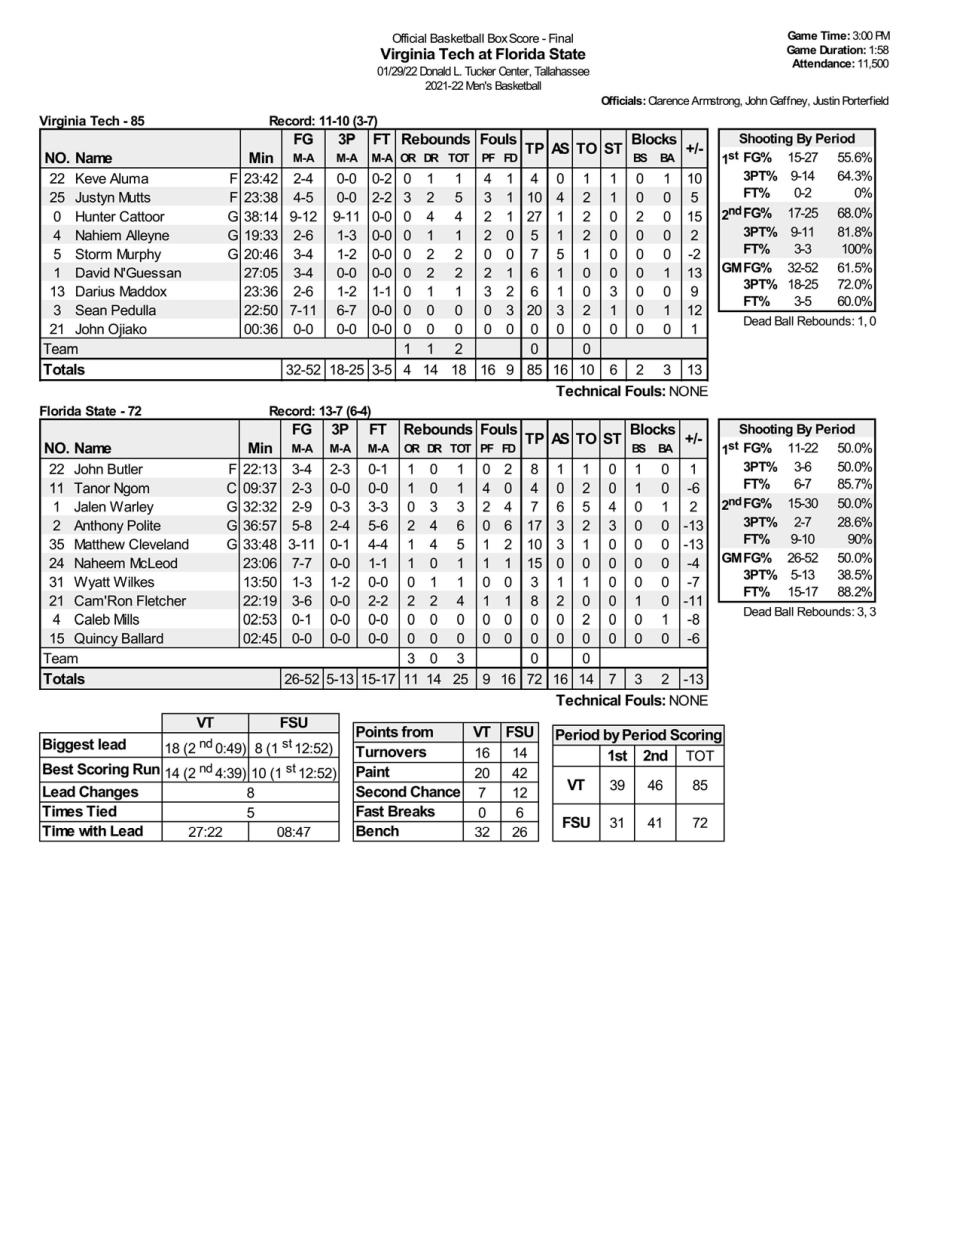 Box score from Florida State's home loss to Virginia Tech on Jan. 29.